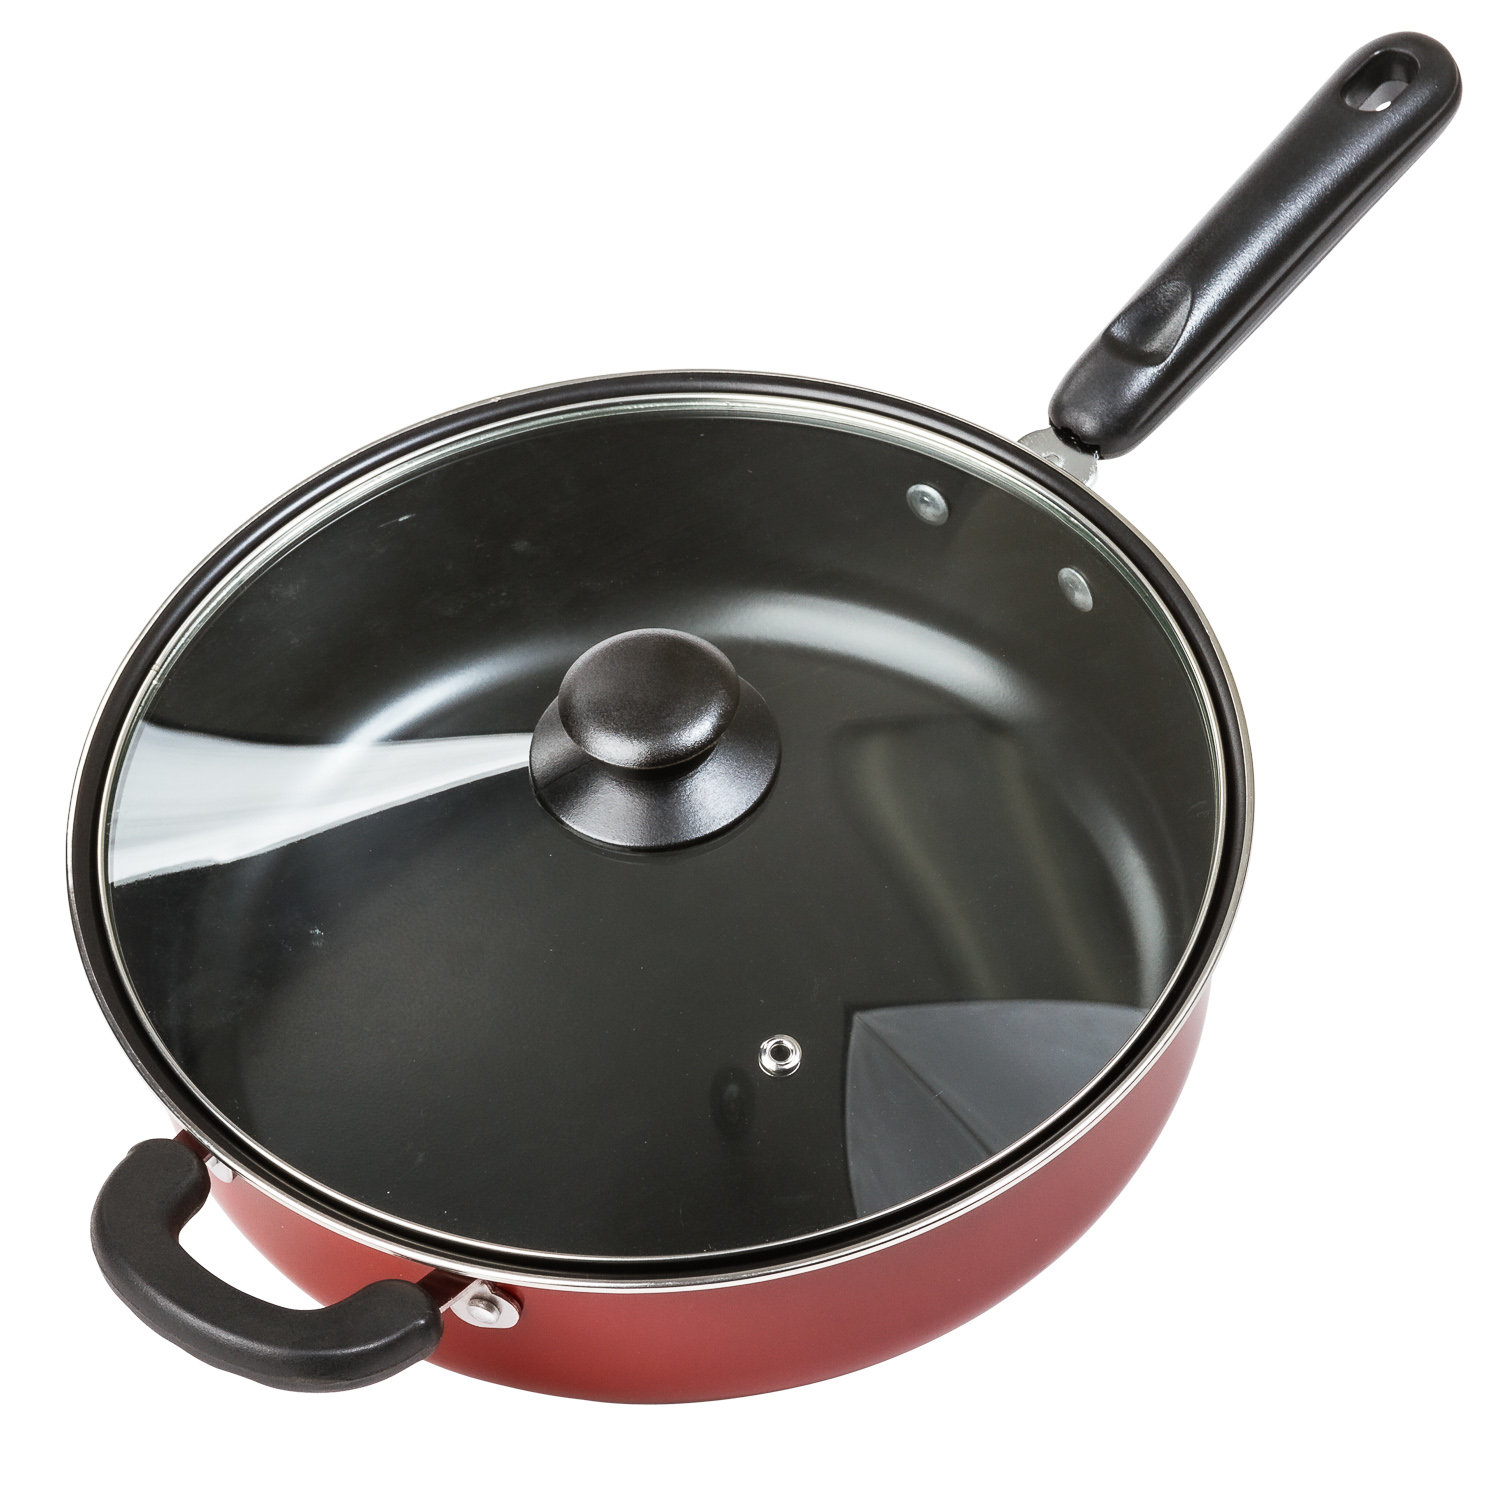 Better Chef 10 Inch Red Aluminum Deep Frying Pan with Glass Lid